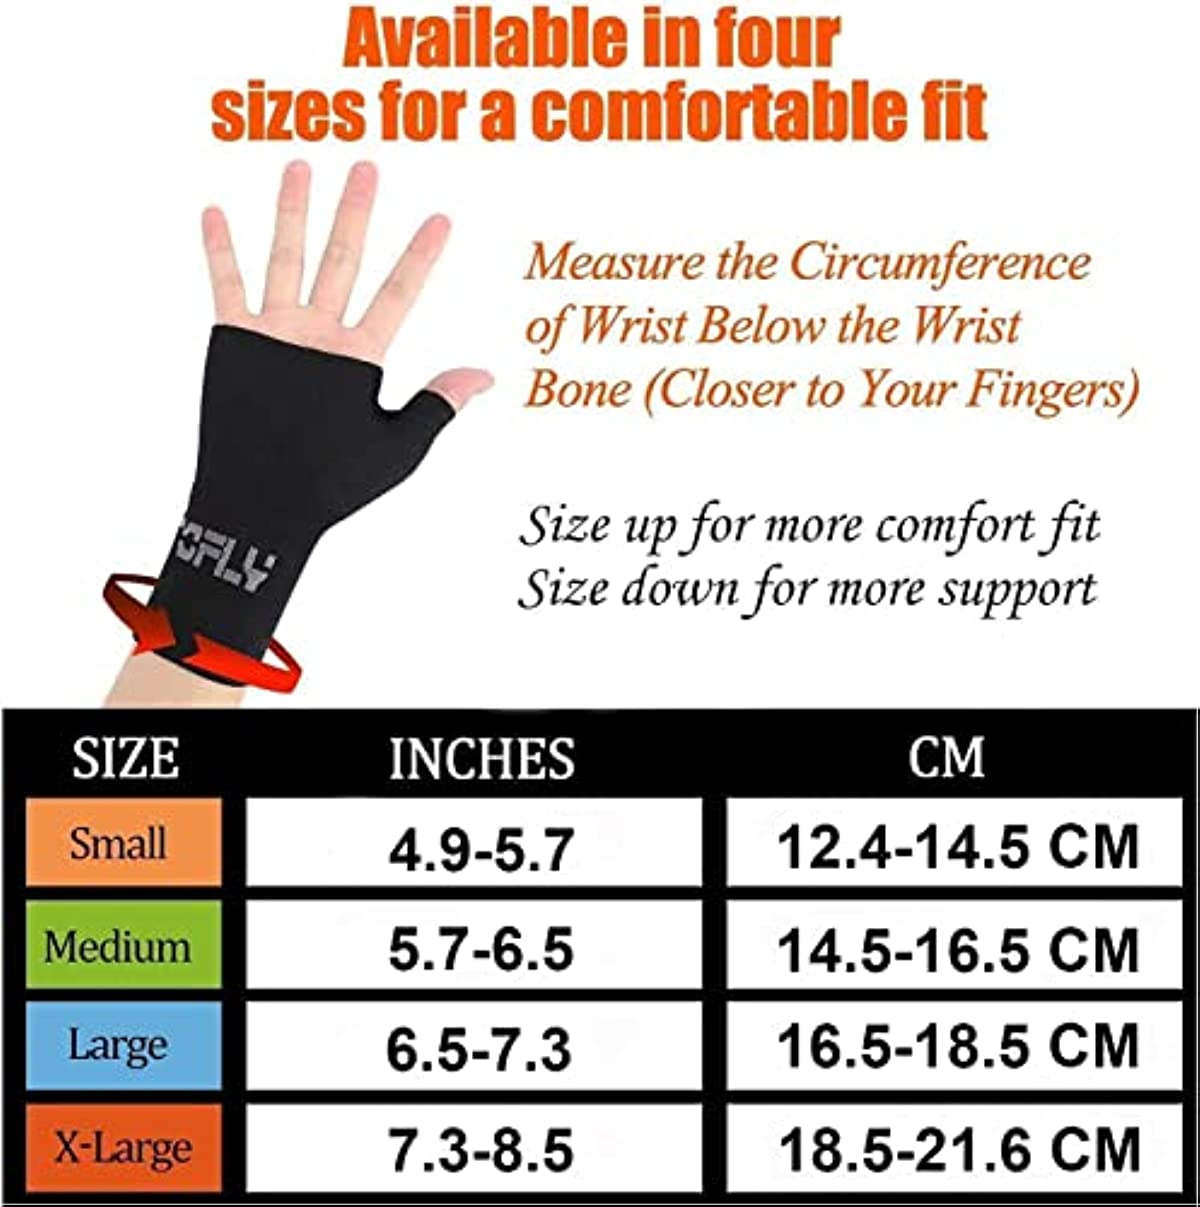 TOFLY® Wrist & Thumb Support Sleeve, 1 Pair Compression Arthritis Gloves for Unisex, Ideal for Carpal Tunnel, Wrist Pain & Fatigue, Sprains, RSI, Tendonitis, Hand Instability, Sports, Typing, Black S